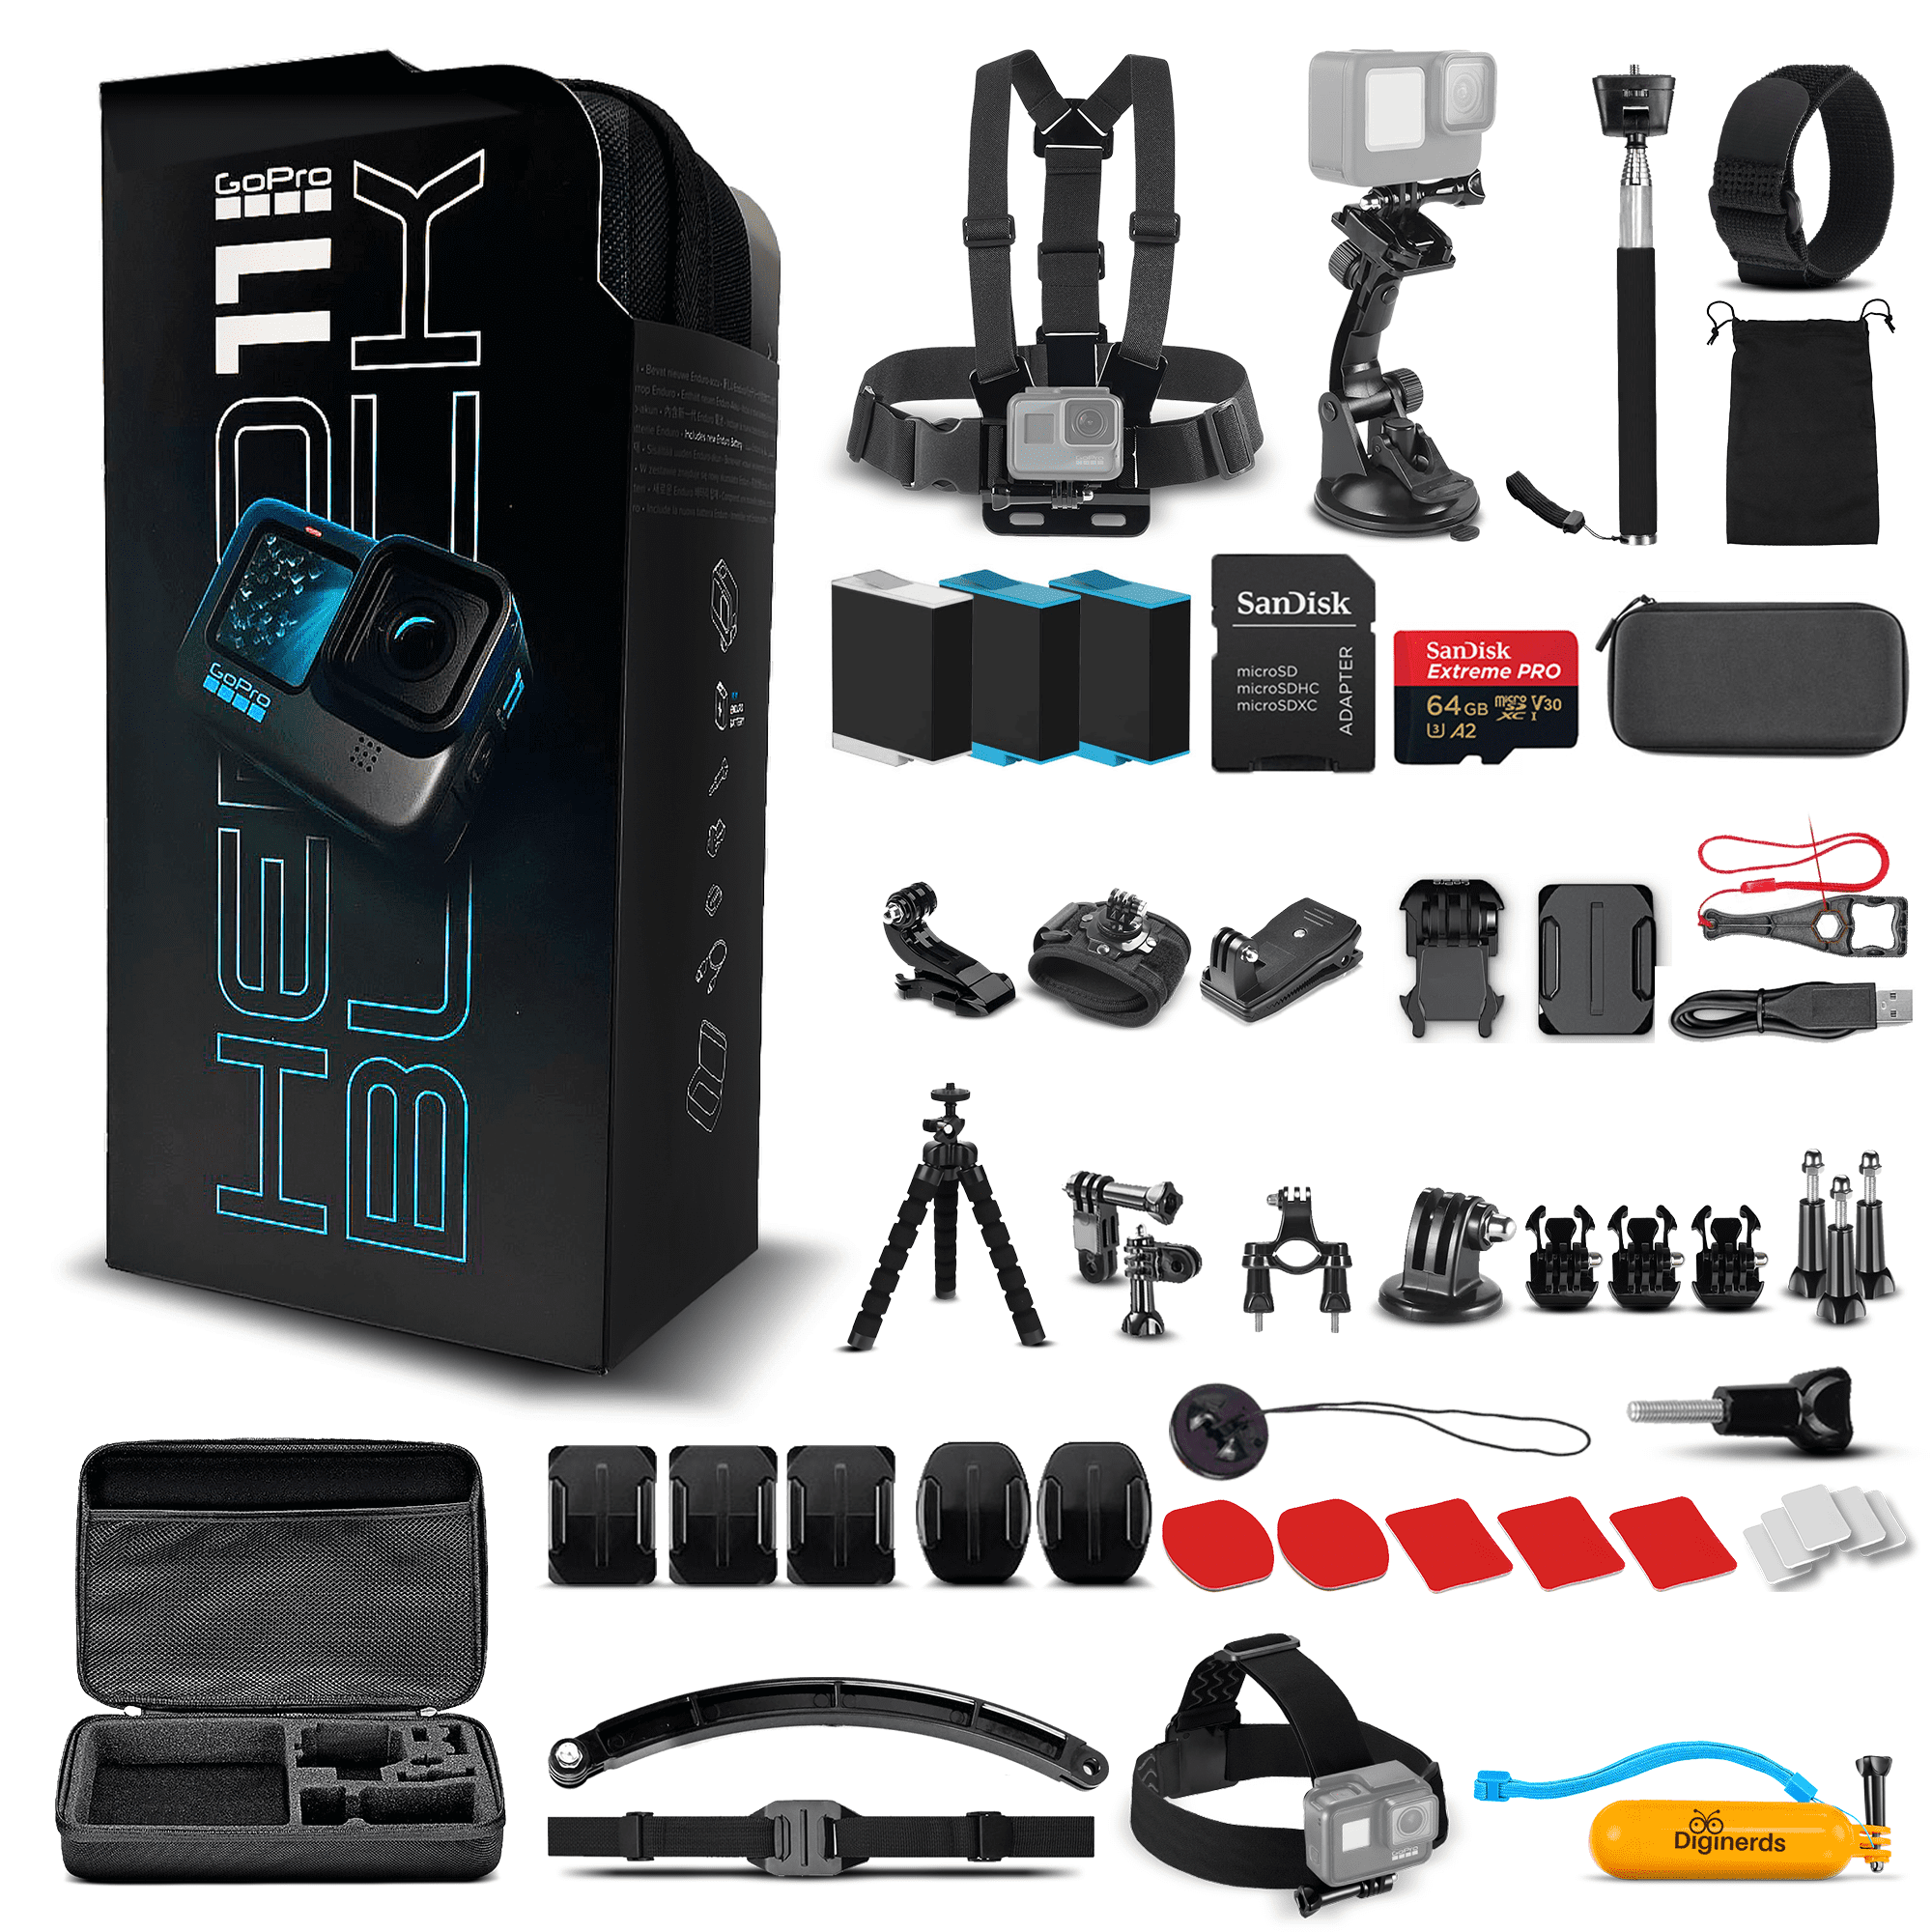 GoPro HERO11 - Action Camera + 64GB Card, 50 Piece Accessory Kit